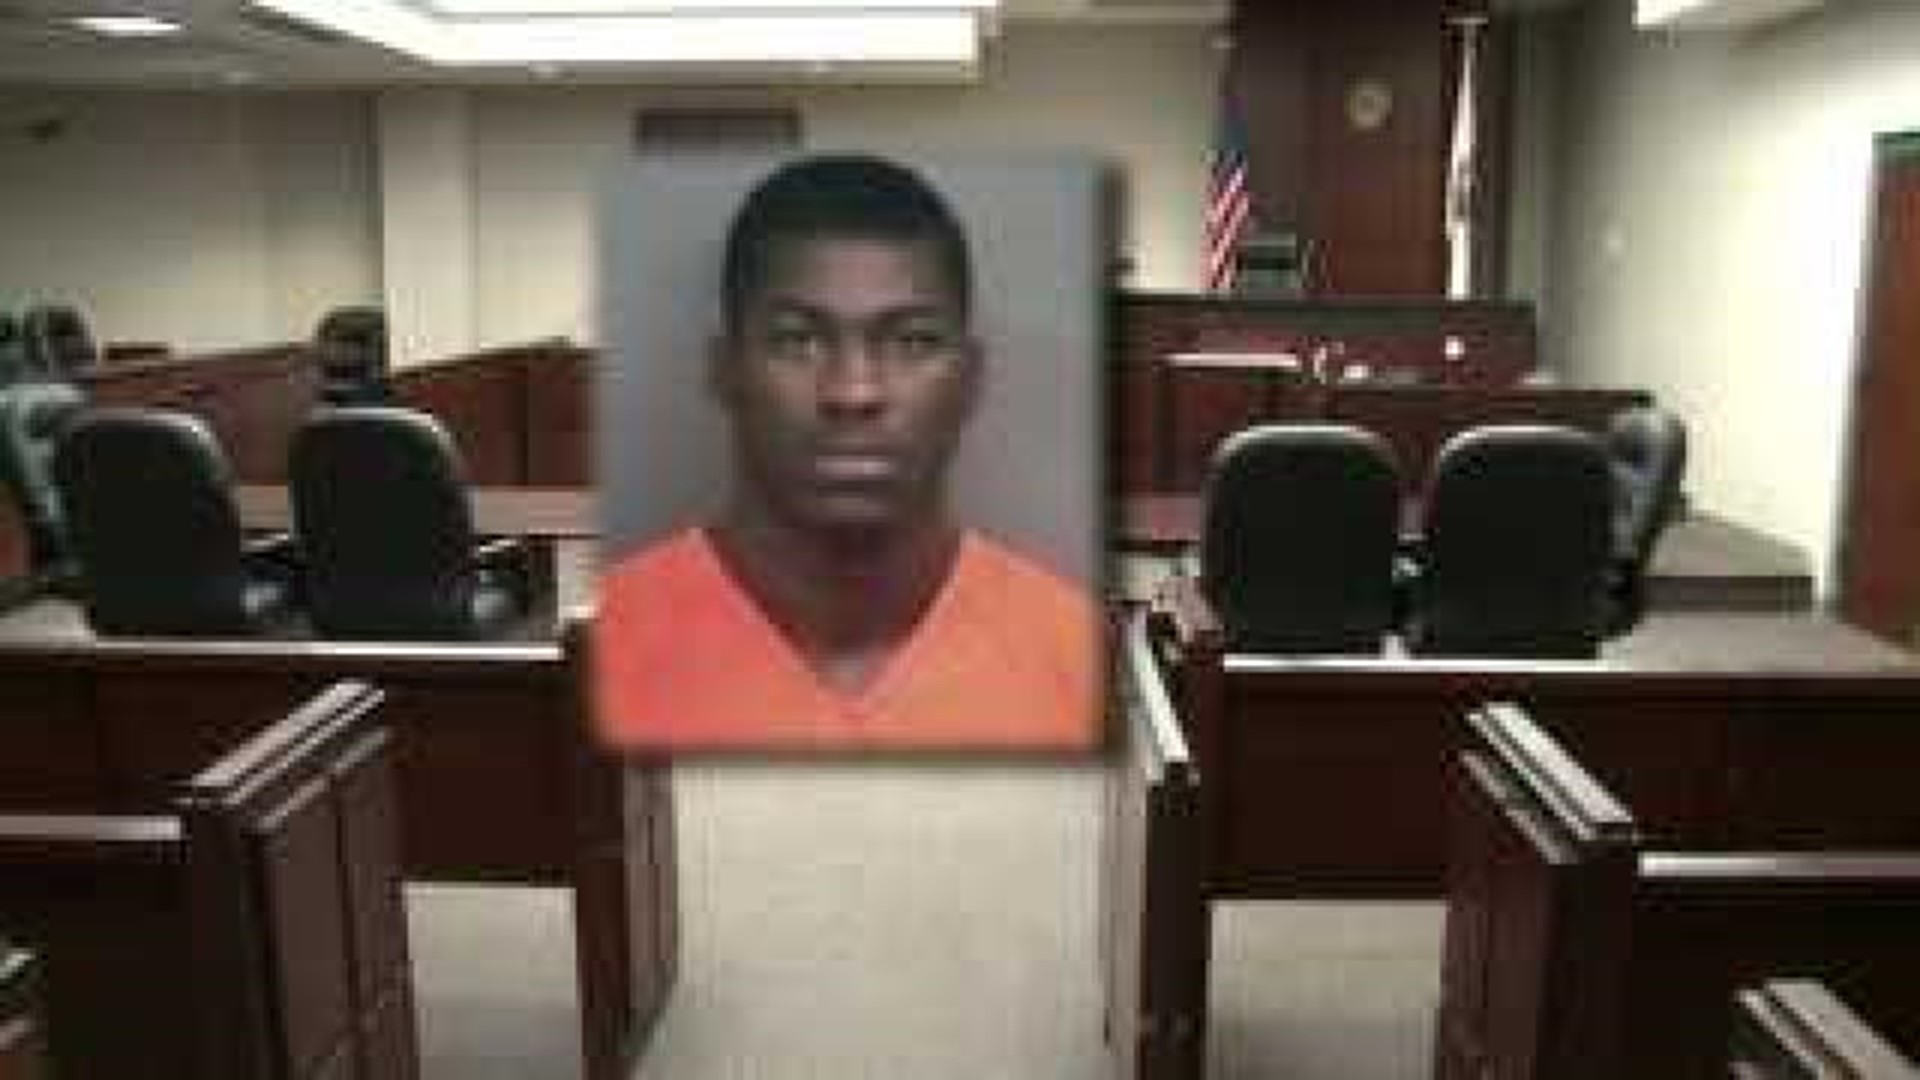 Murder charges dismissed in Rock Island shooting case